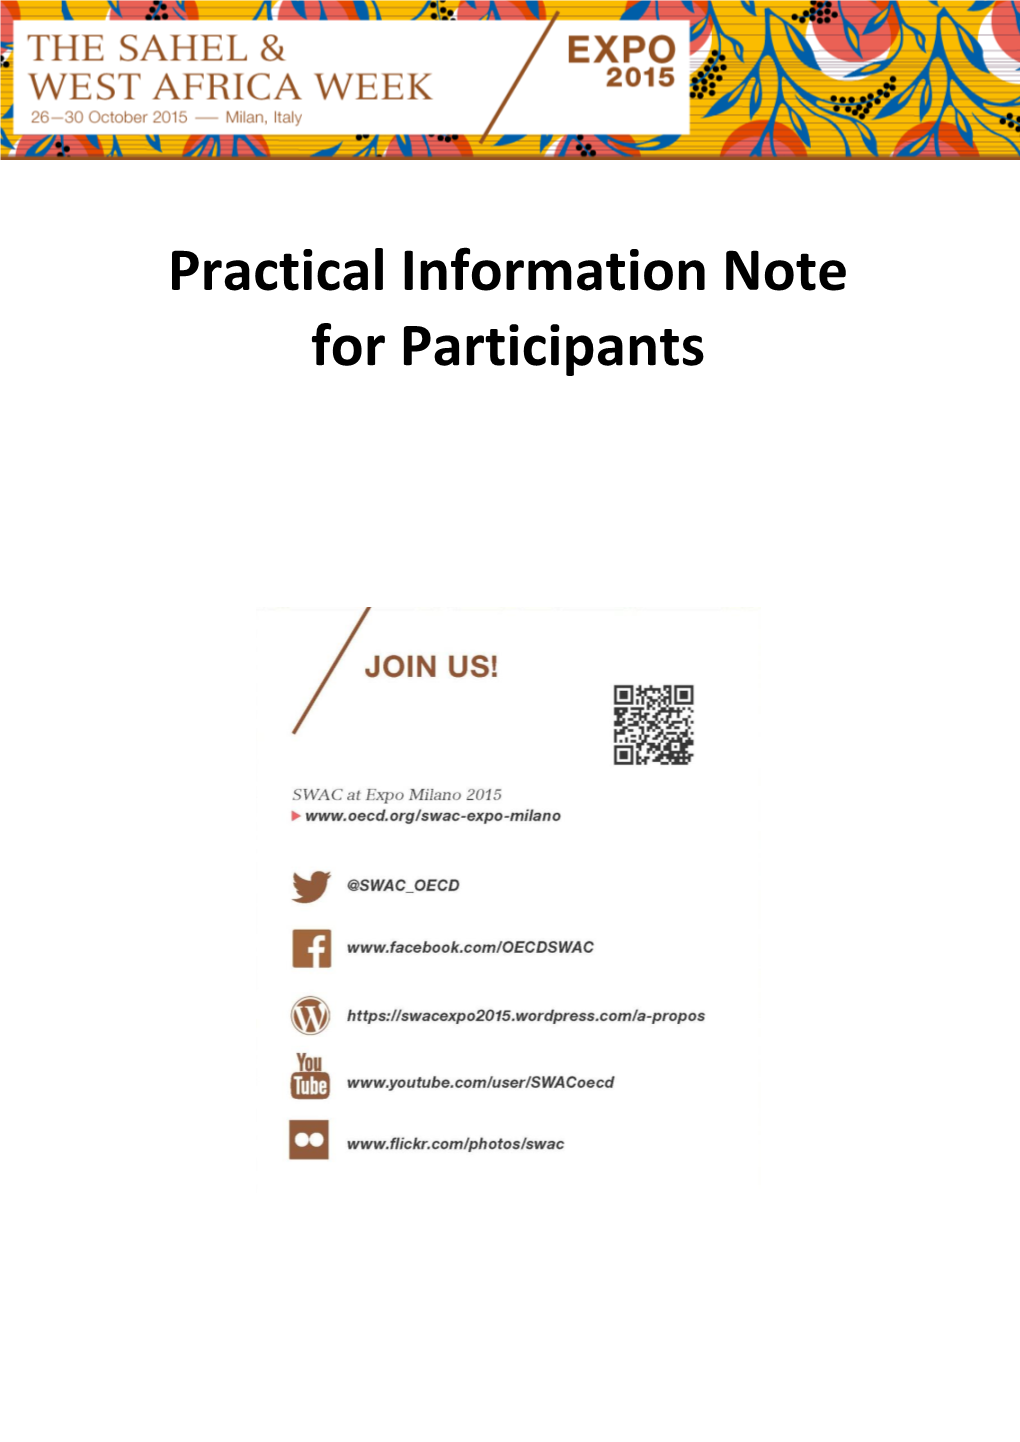 Practical Information Note for Participants